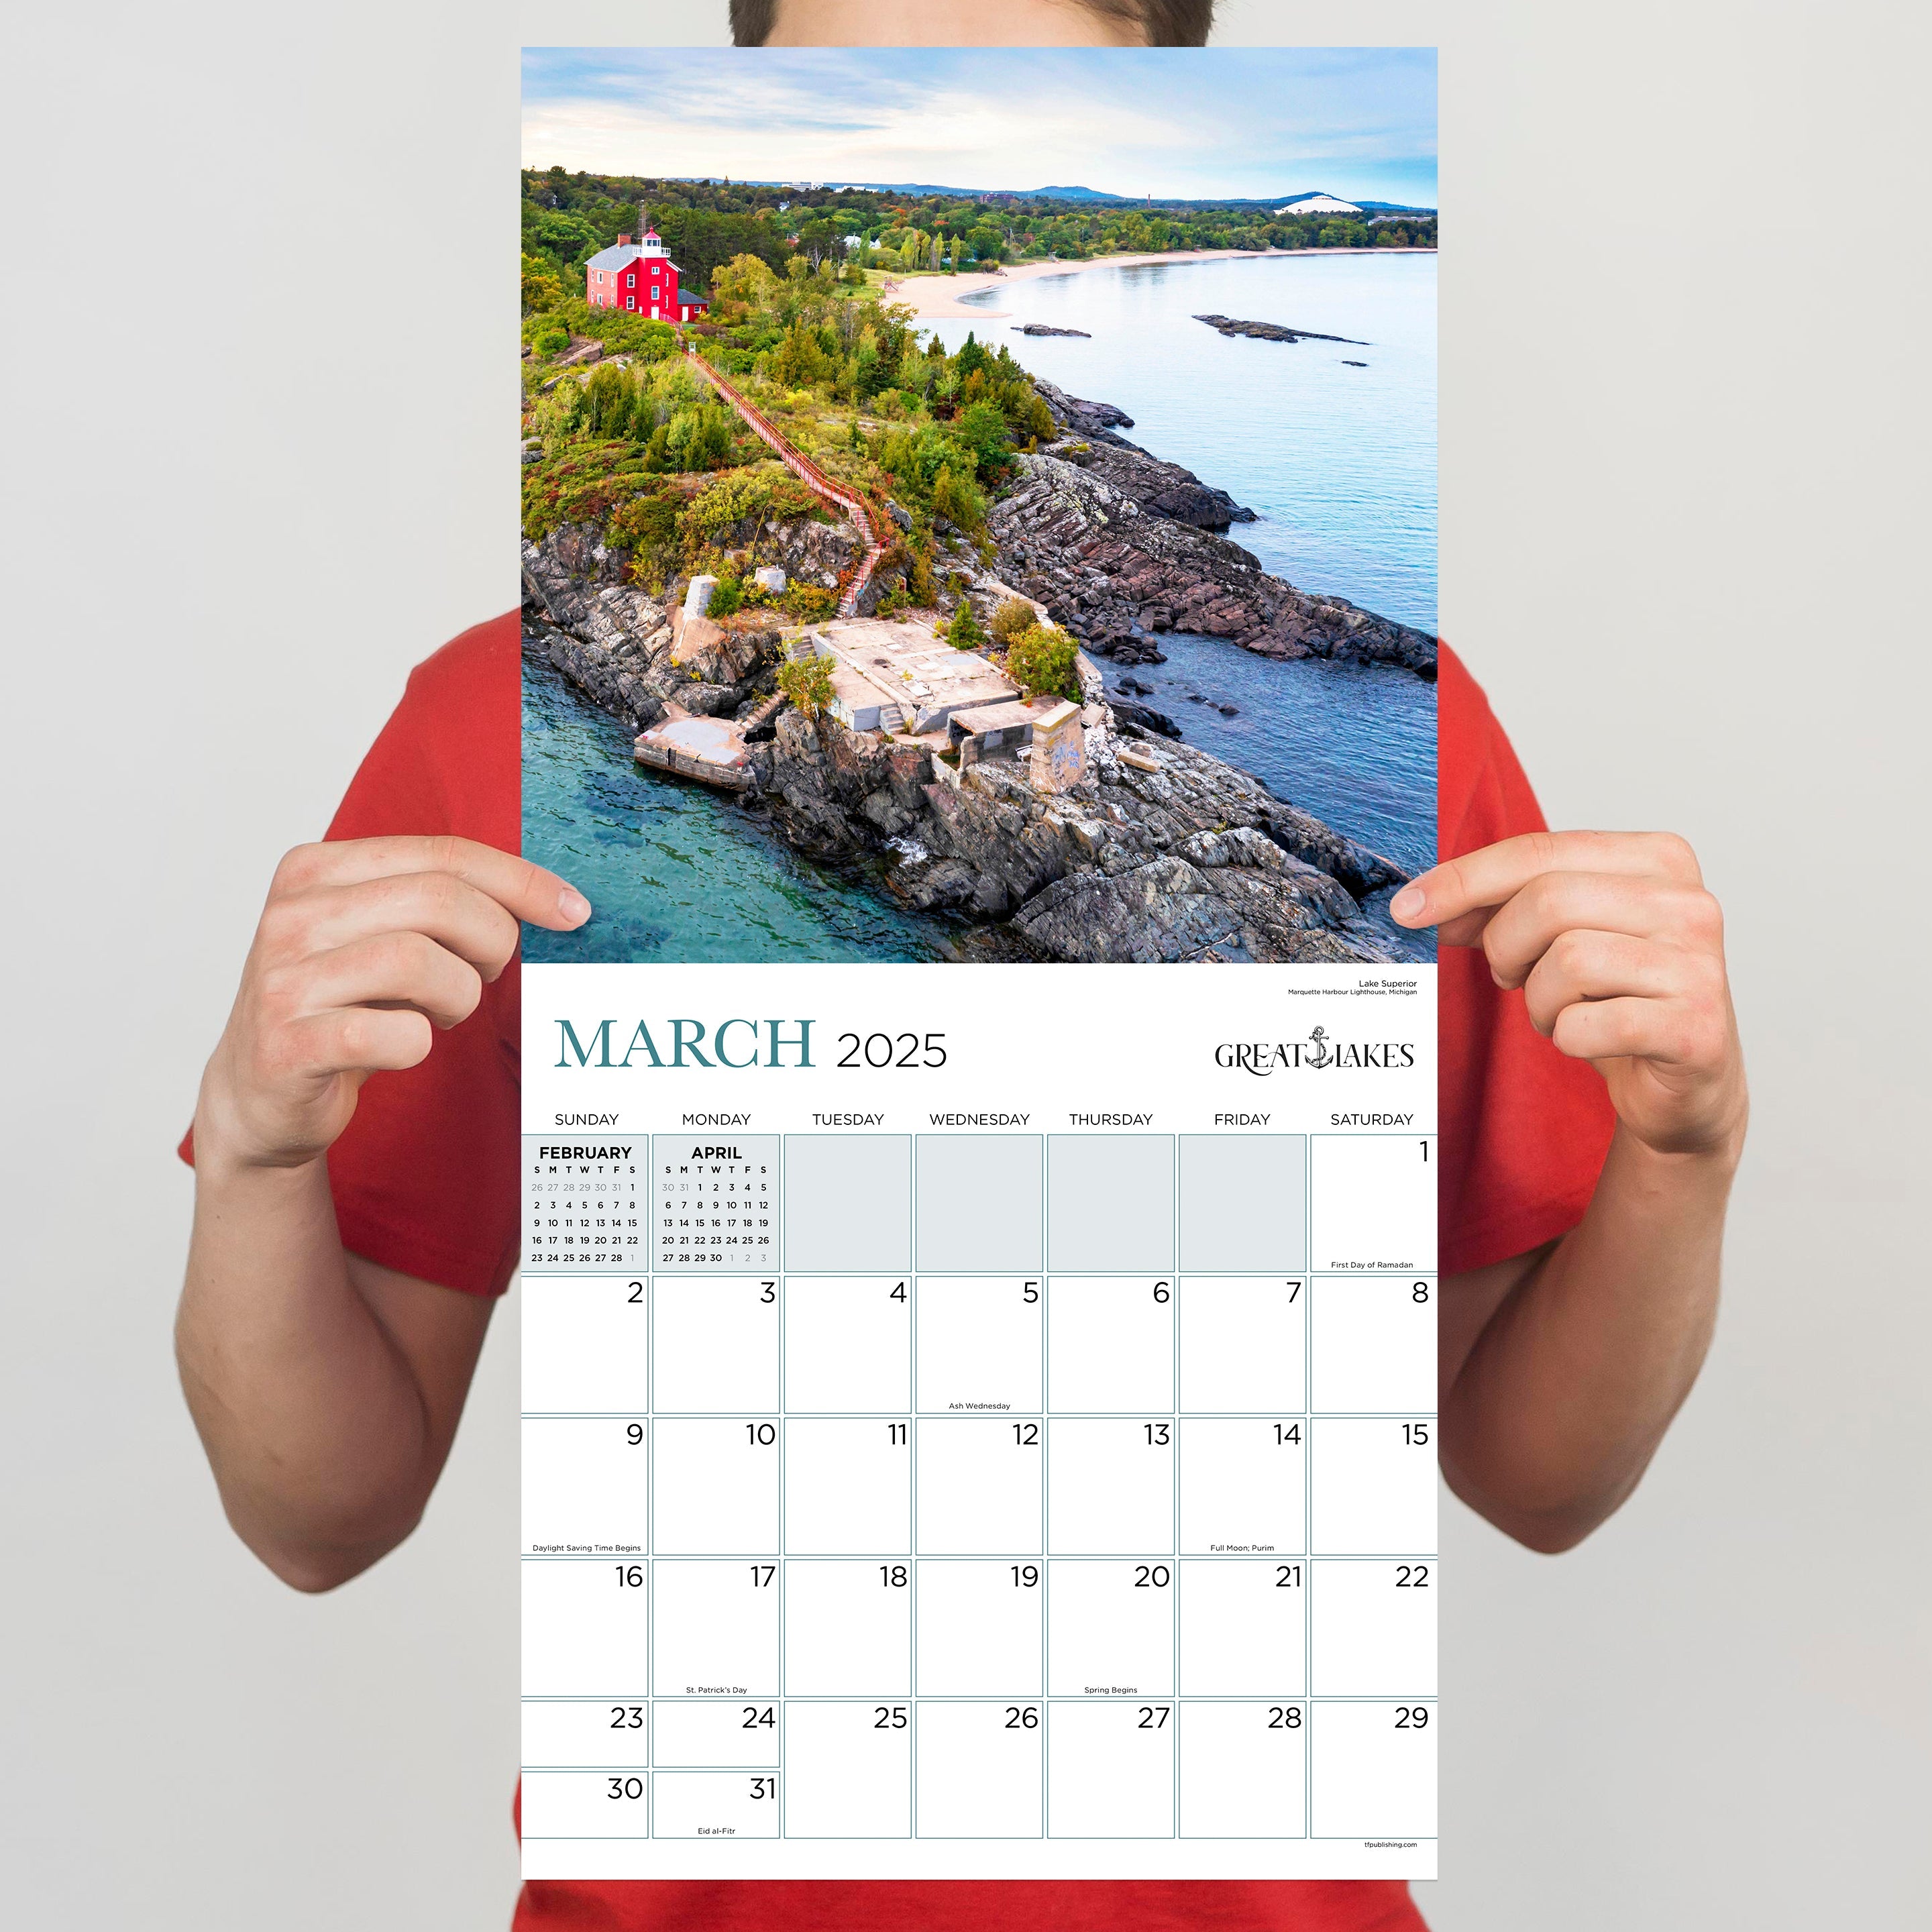 2025 Great Lakes by TF - Square Wall Calendar